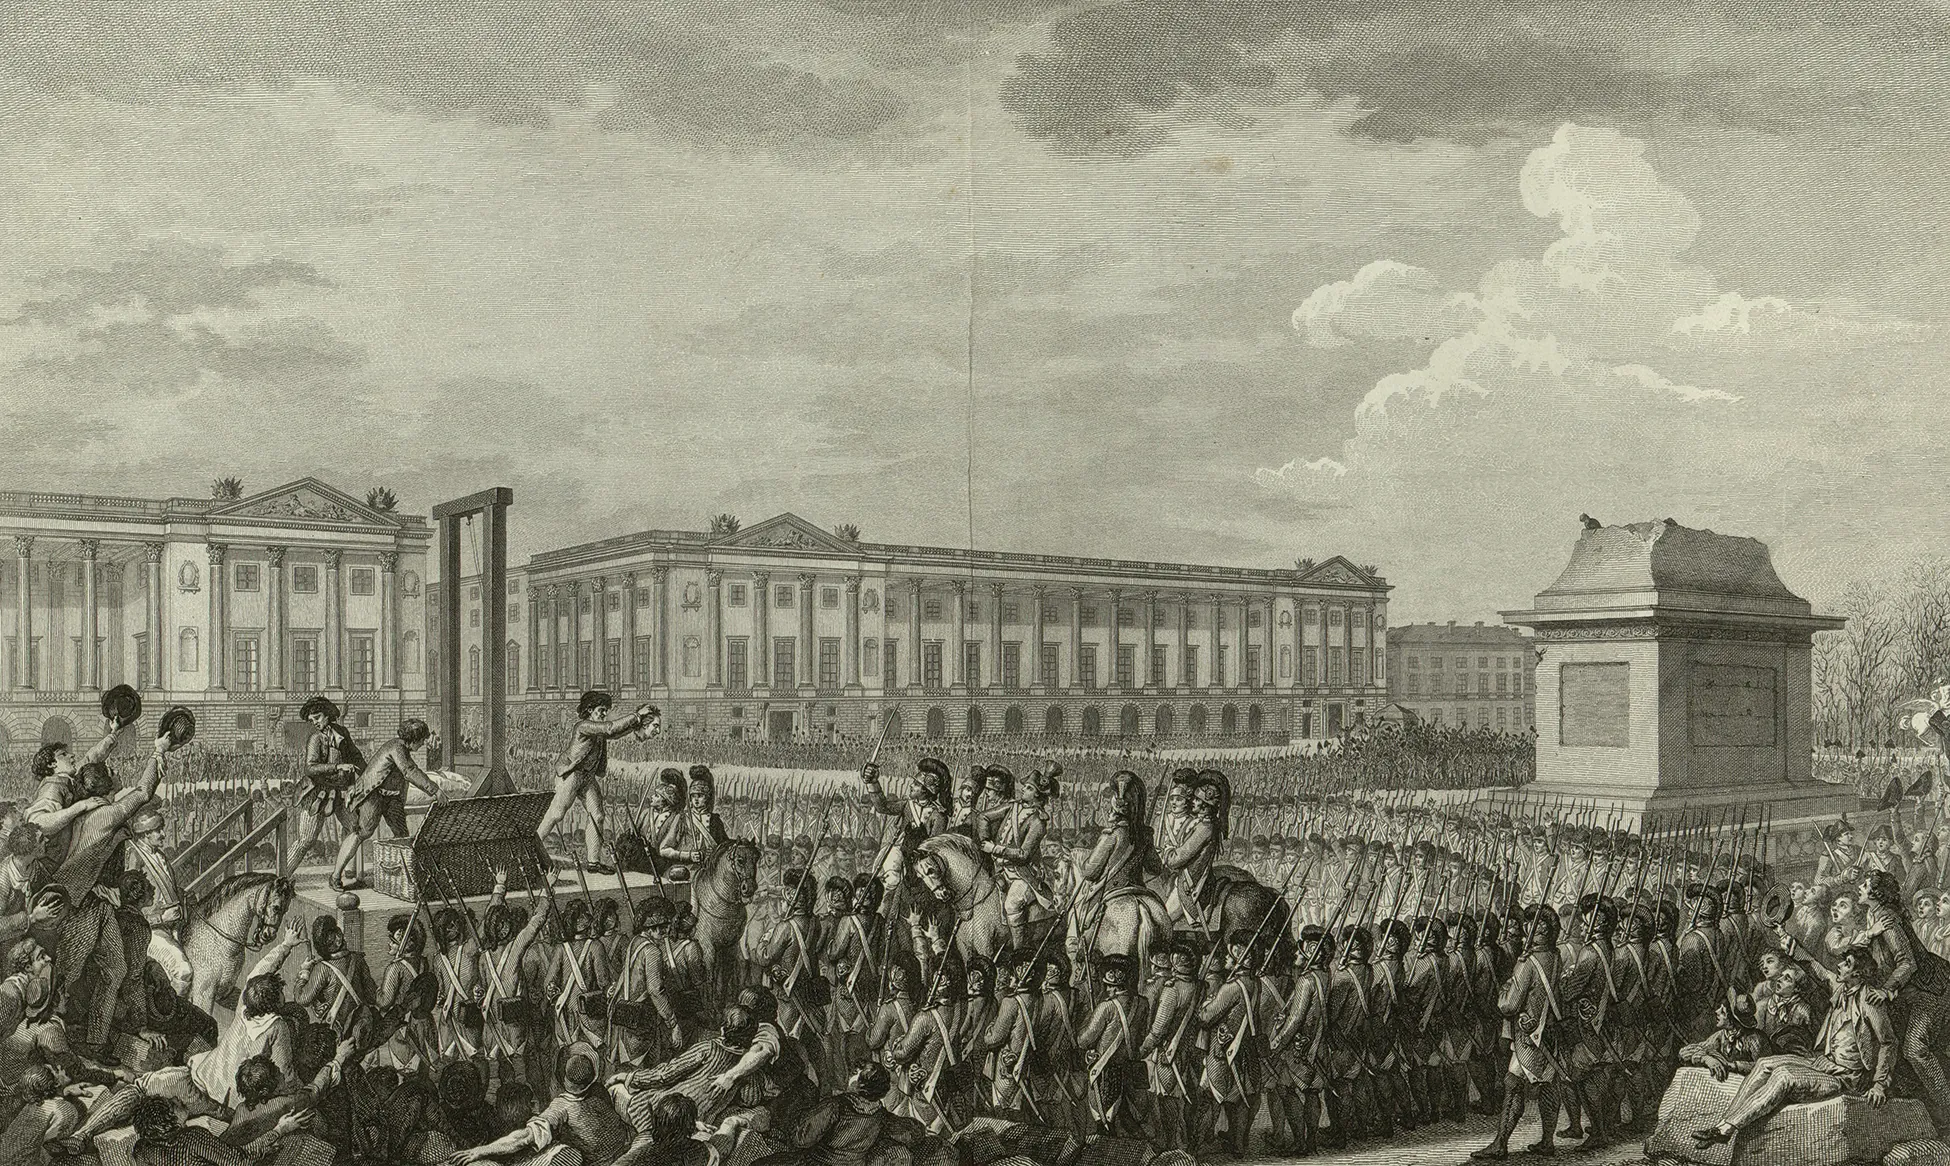 A engraving depicts the beheading of Louis XVI during the French Revolution. A large crowd surrounds a scaffold on which a guillotine is mounted. Louis XVI’s headless body lies on the platform. An executioner holds his head up to the crowd.